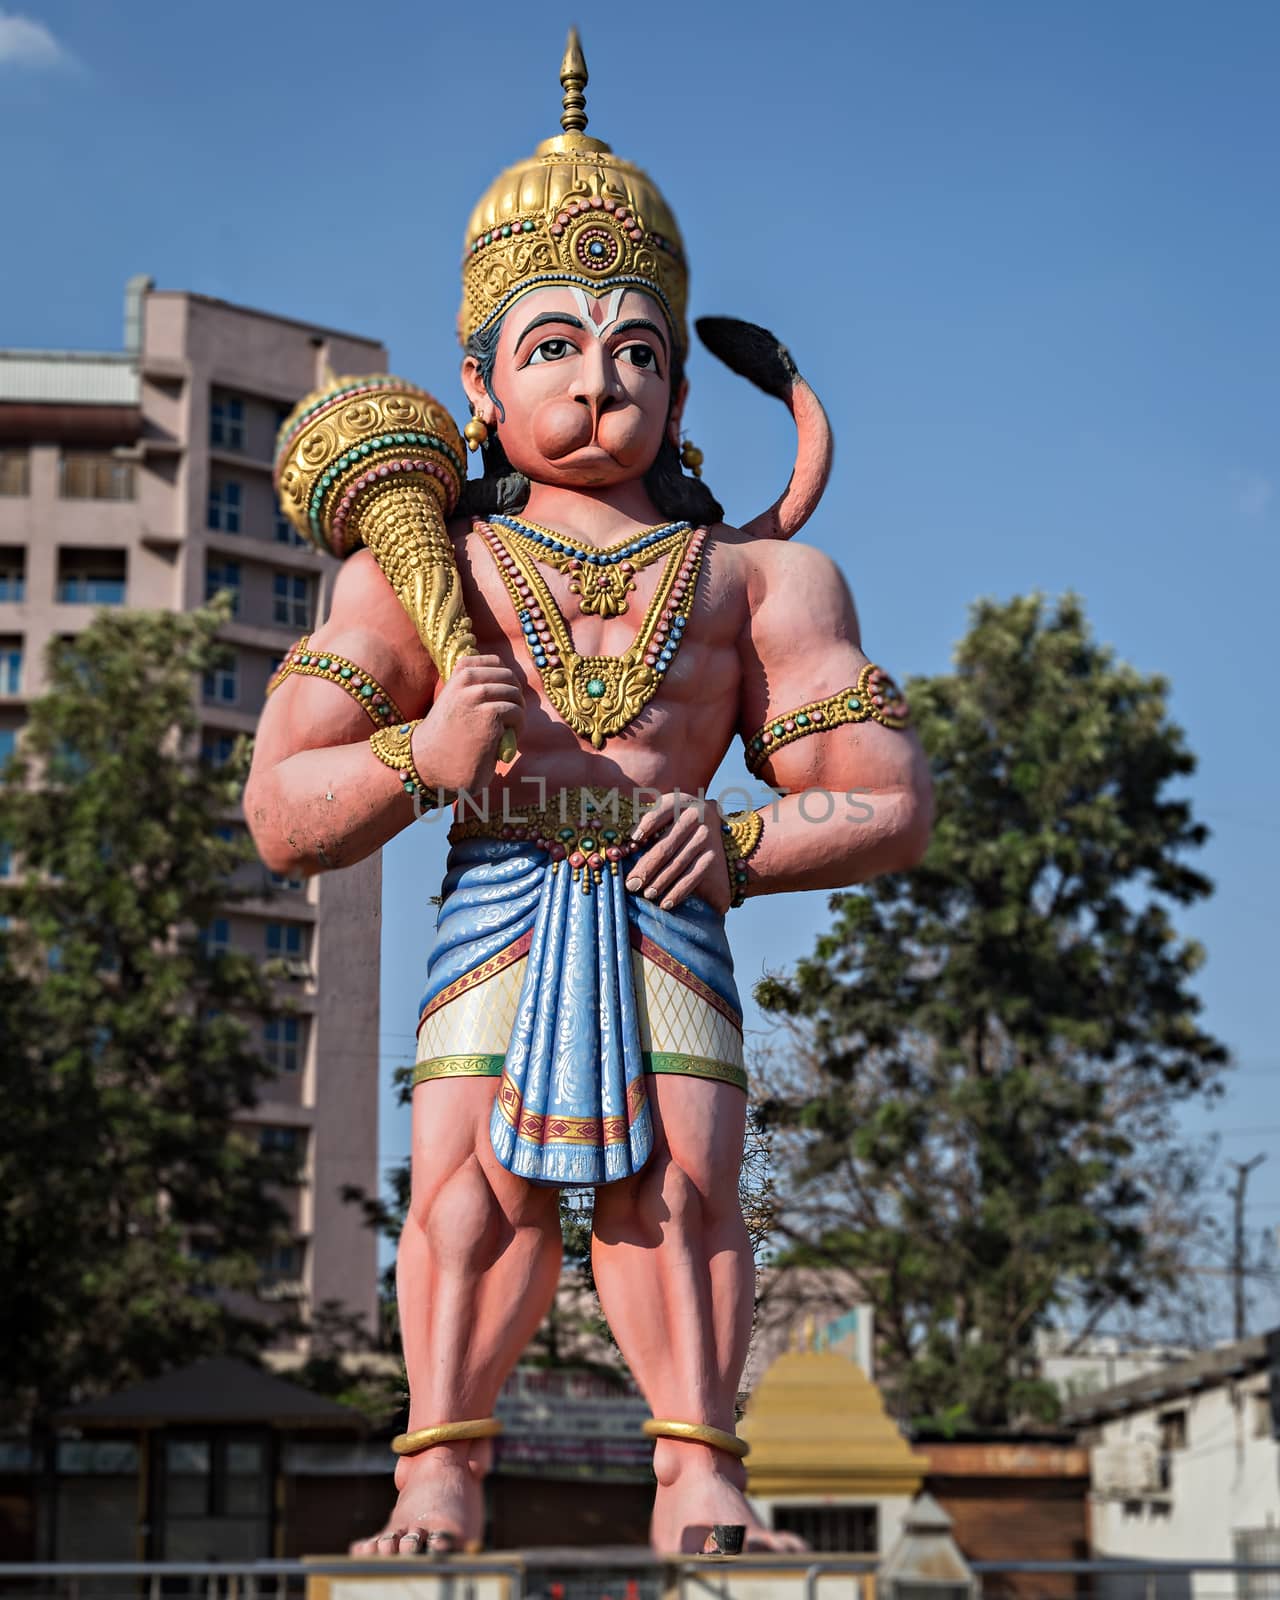 About 30 feet high God Hanuman statue in Pimpri, Pune india. by lalam